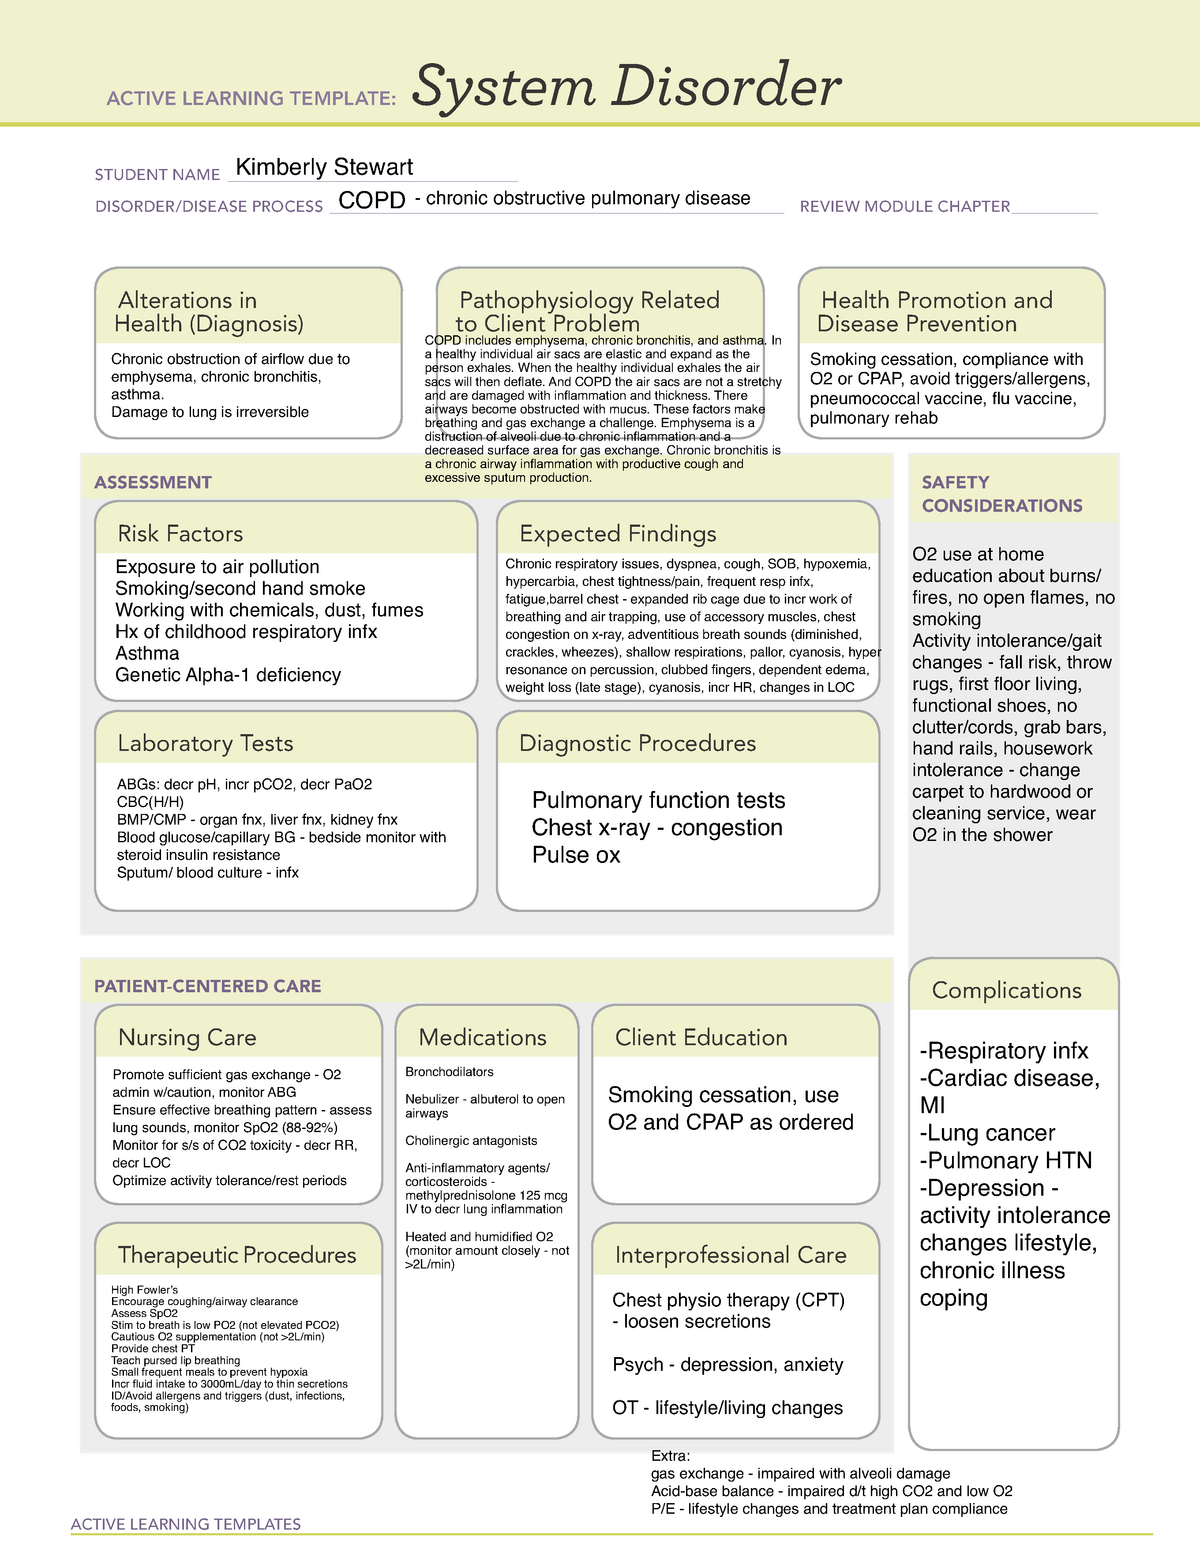 System Disorder Ati Template Copd